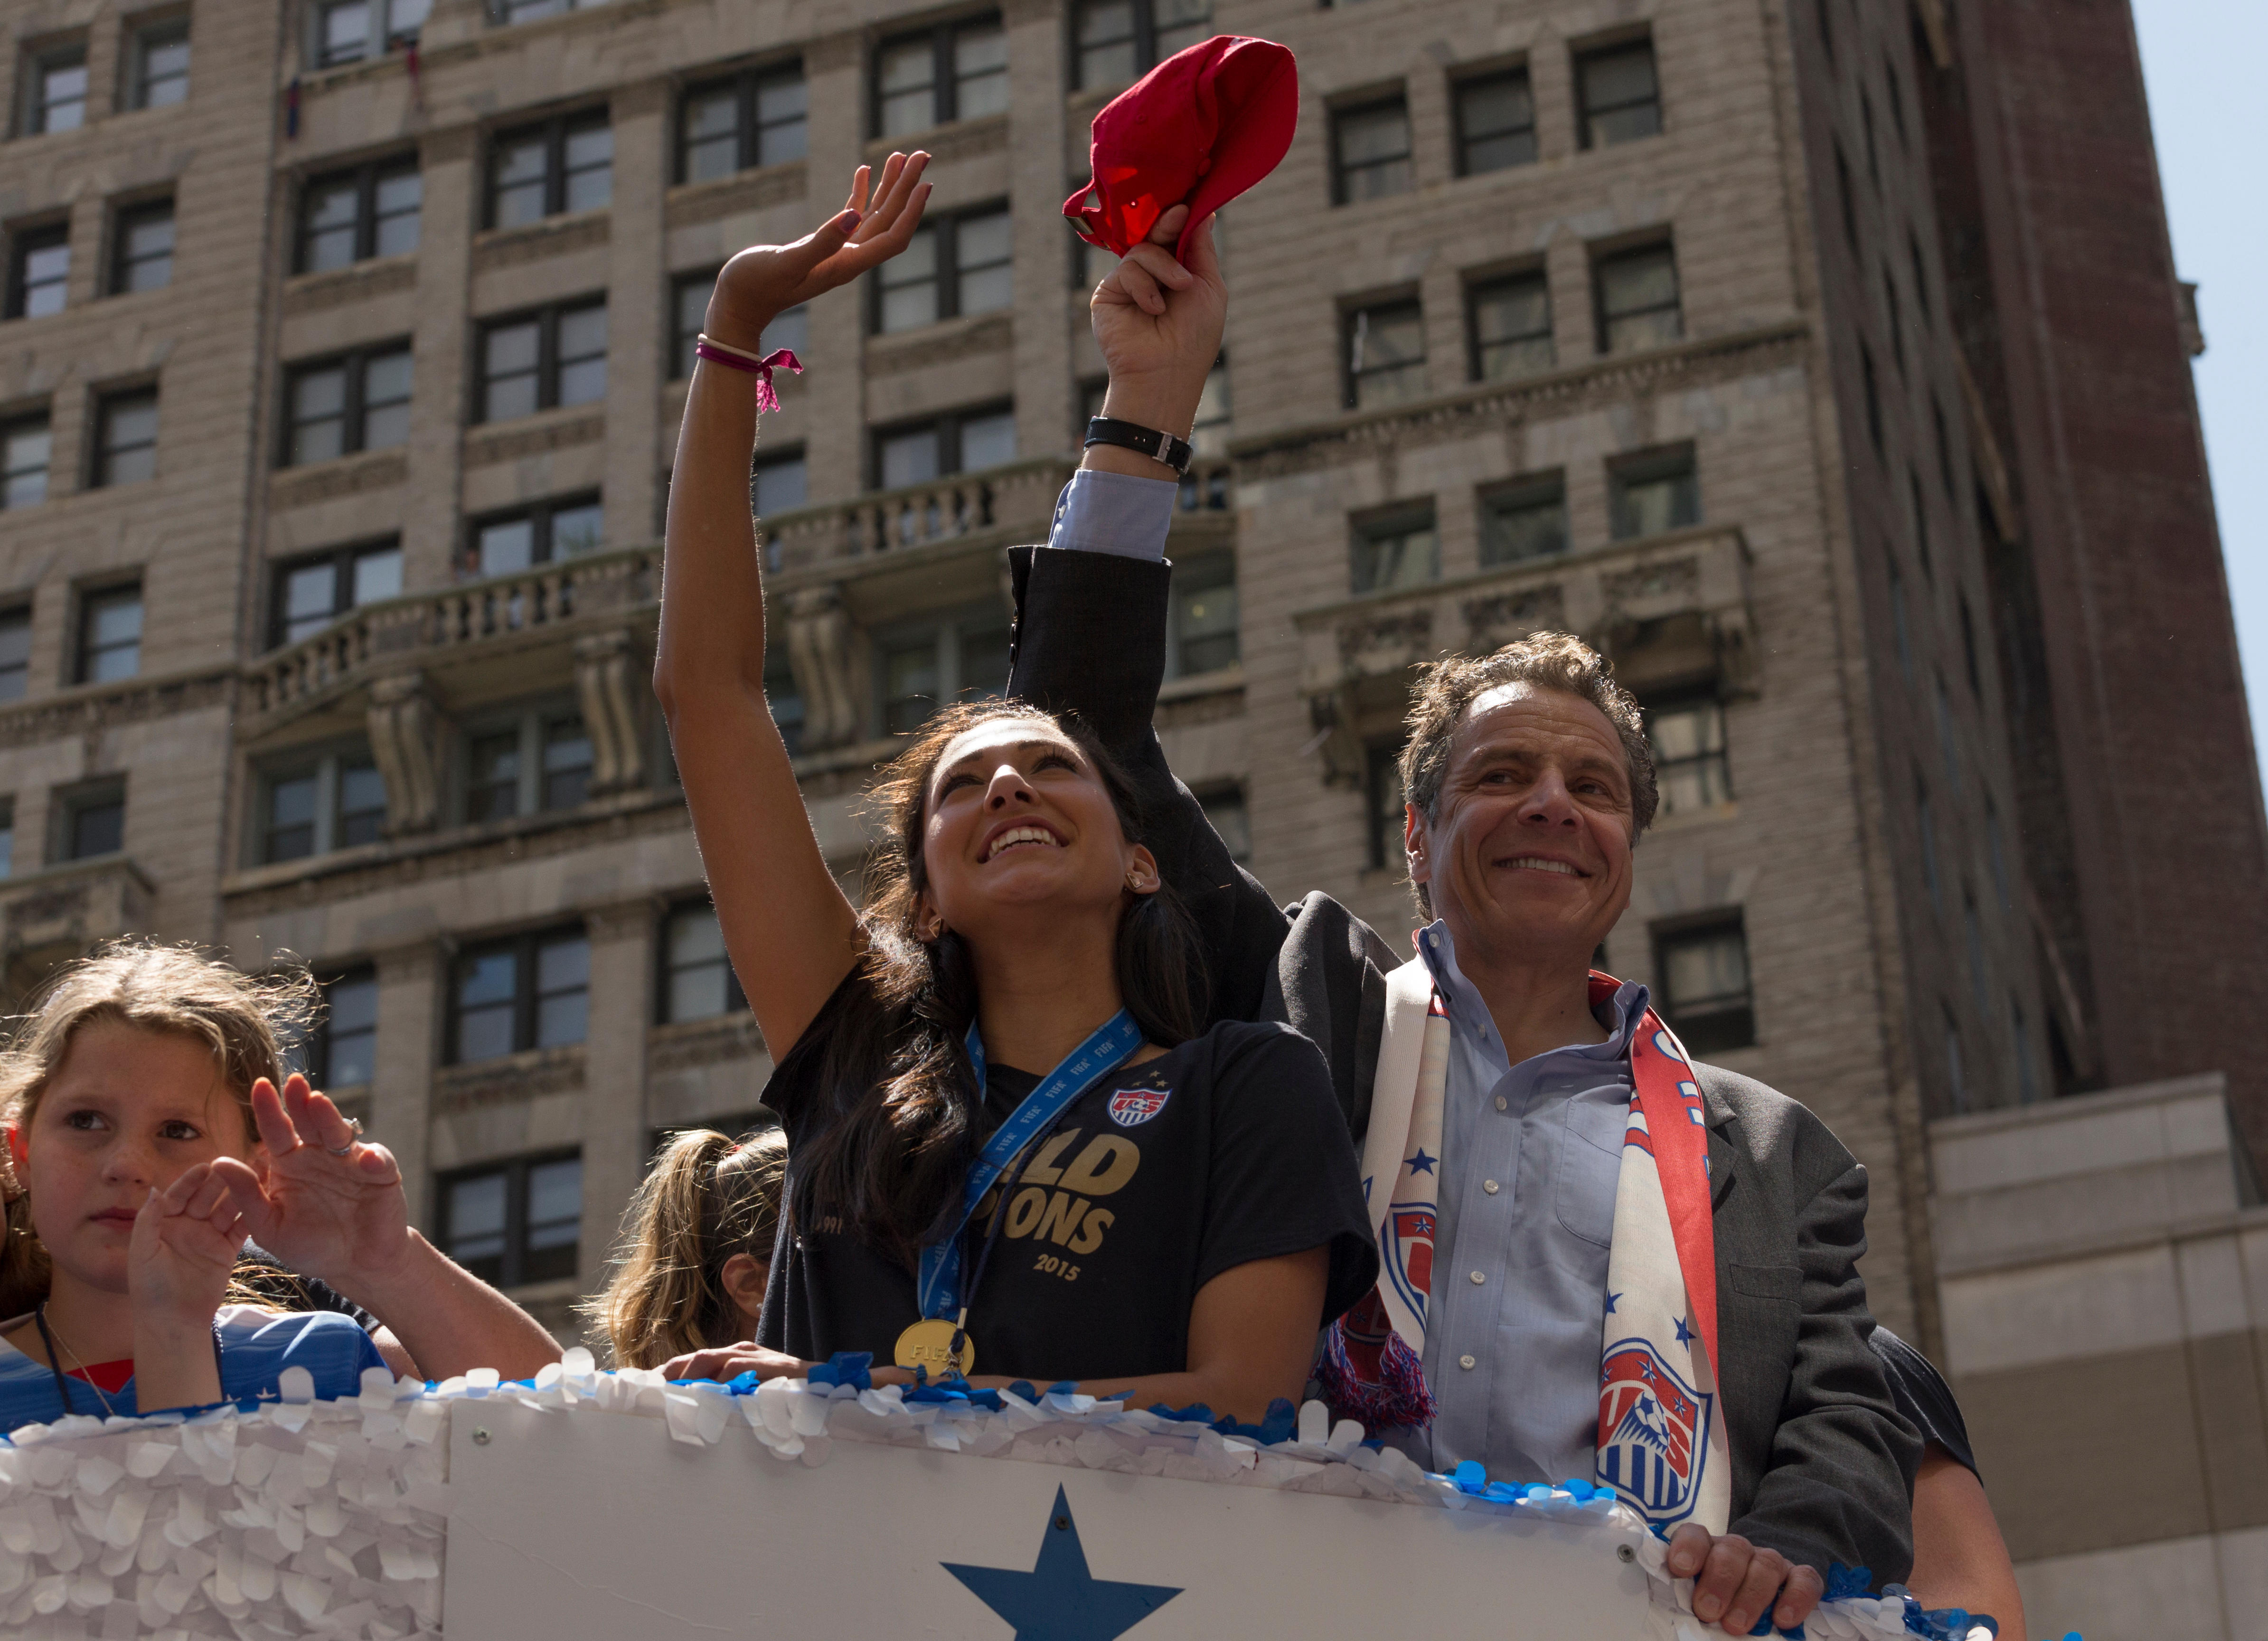 Hope Solo at a parade in New York in 2015 to mark the USA's World Cup win